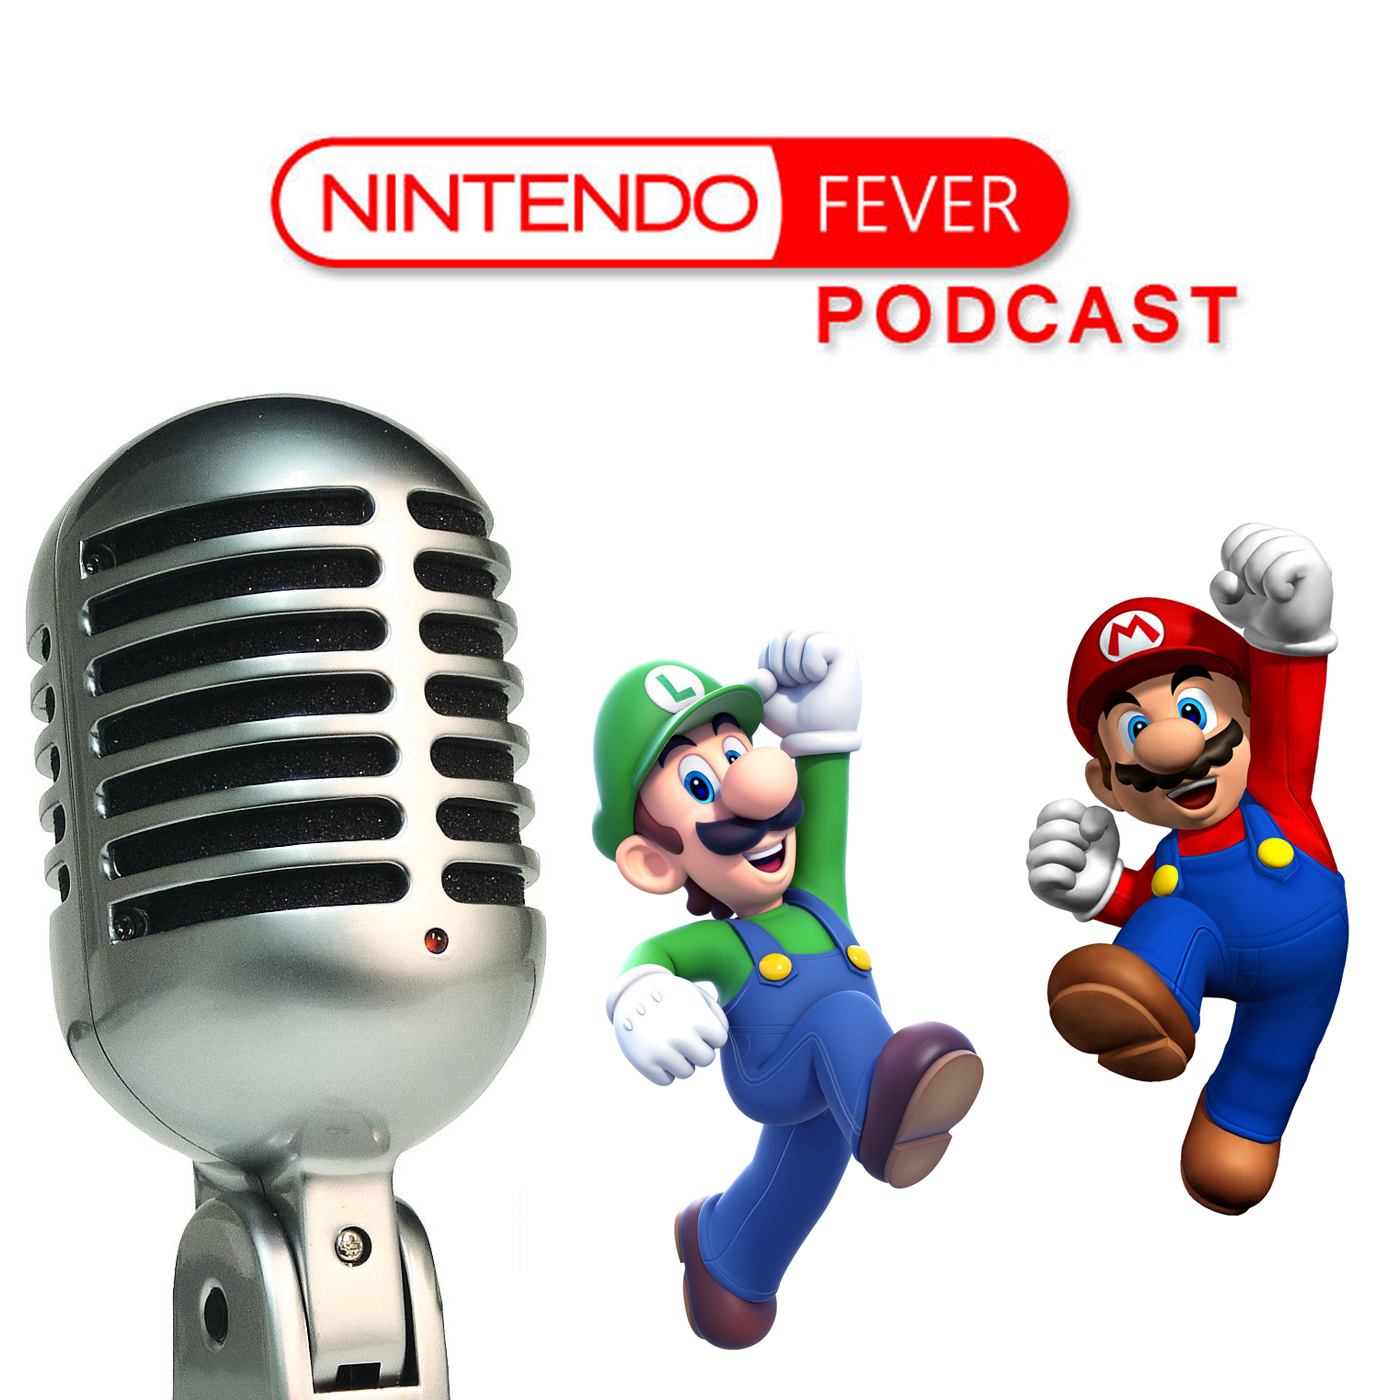 NintendoFever Podcast Episode 104: Games That Scary Us!